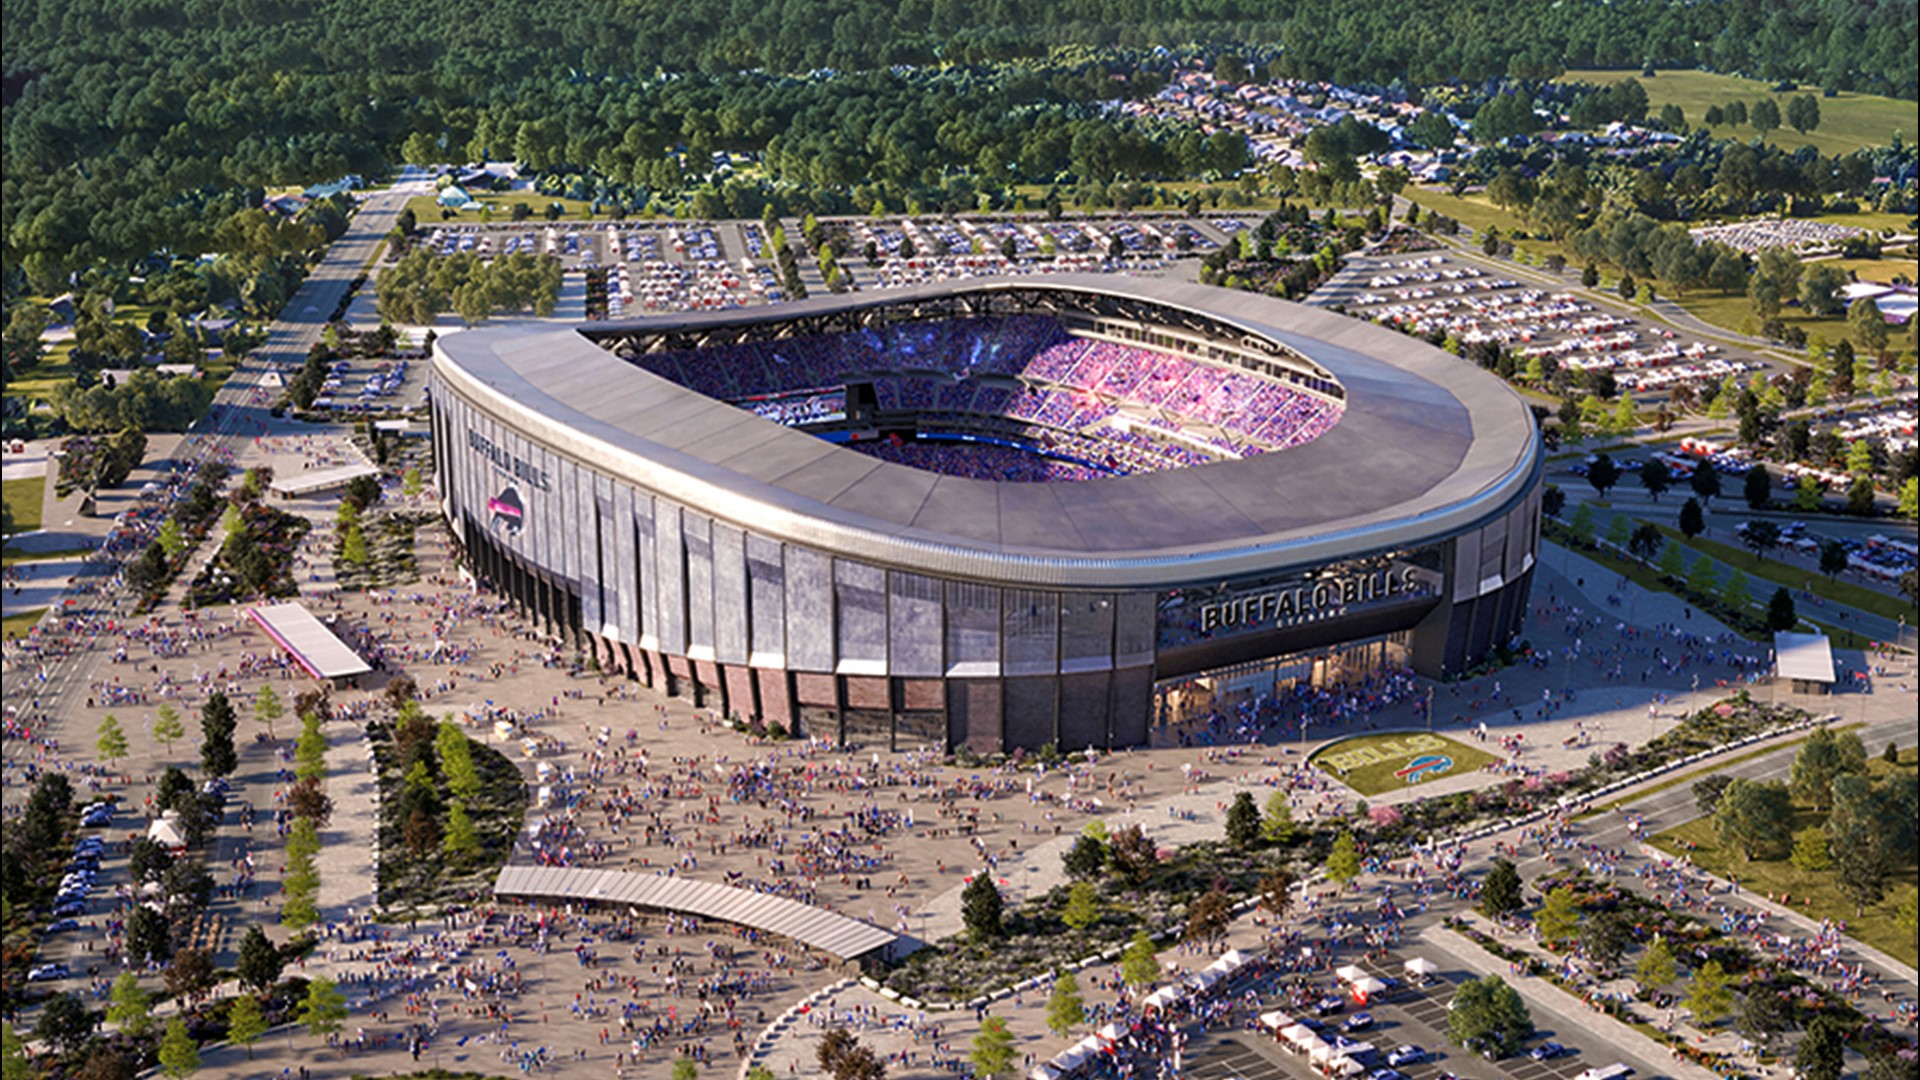 Buffalo Bills VP of Operations & Guest Experience Andy Major provides update on construction at the stadium and impact on parking on games days